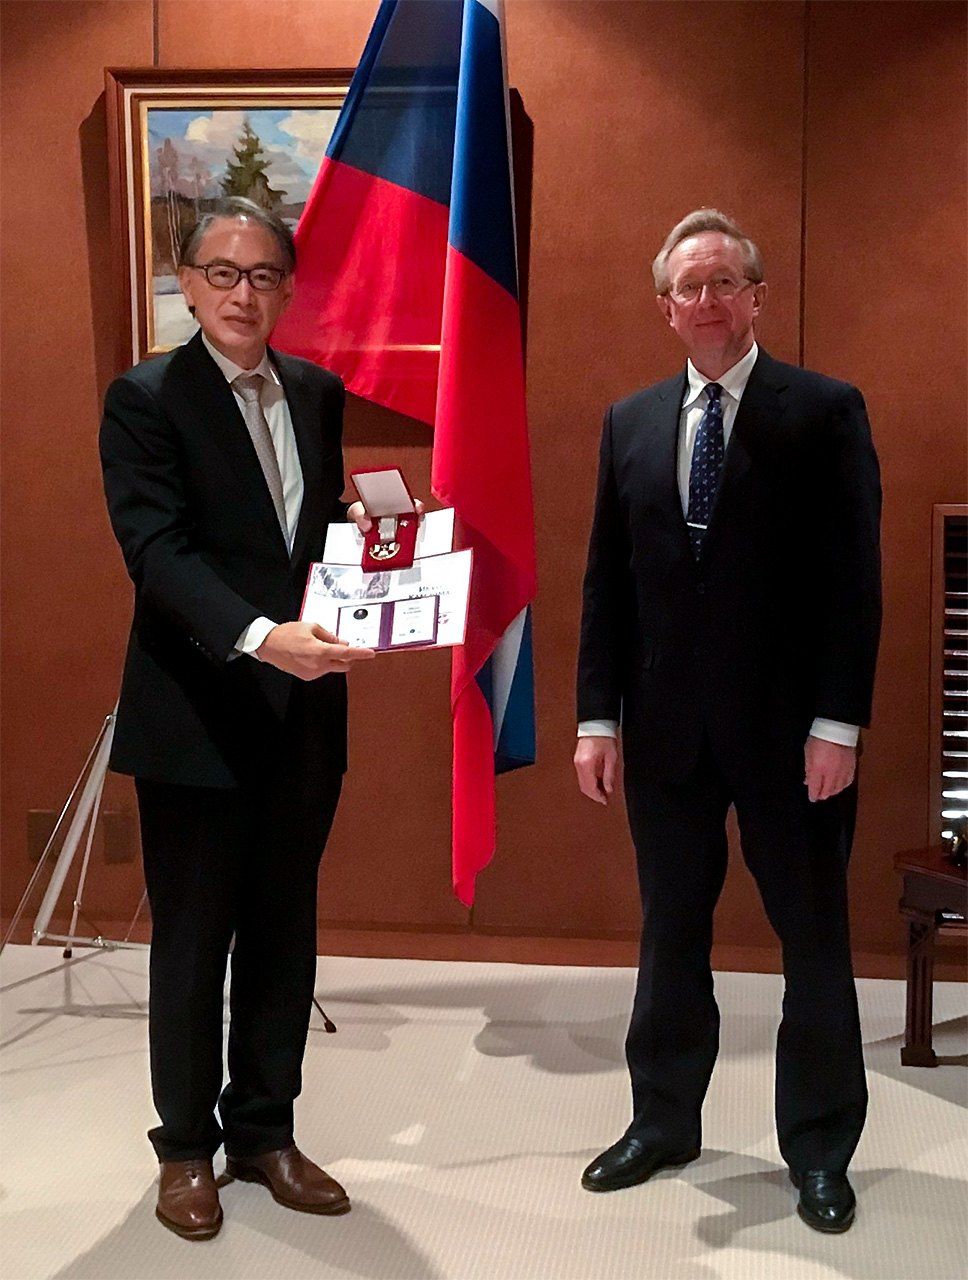 Russian Ambassador to Japan Mikhail Galuzin (right) presents Kameyama with the Dostoevsky Star medal at the award ceremony on December 2, 2021. (Courtesy of Kameyama Ikuo)